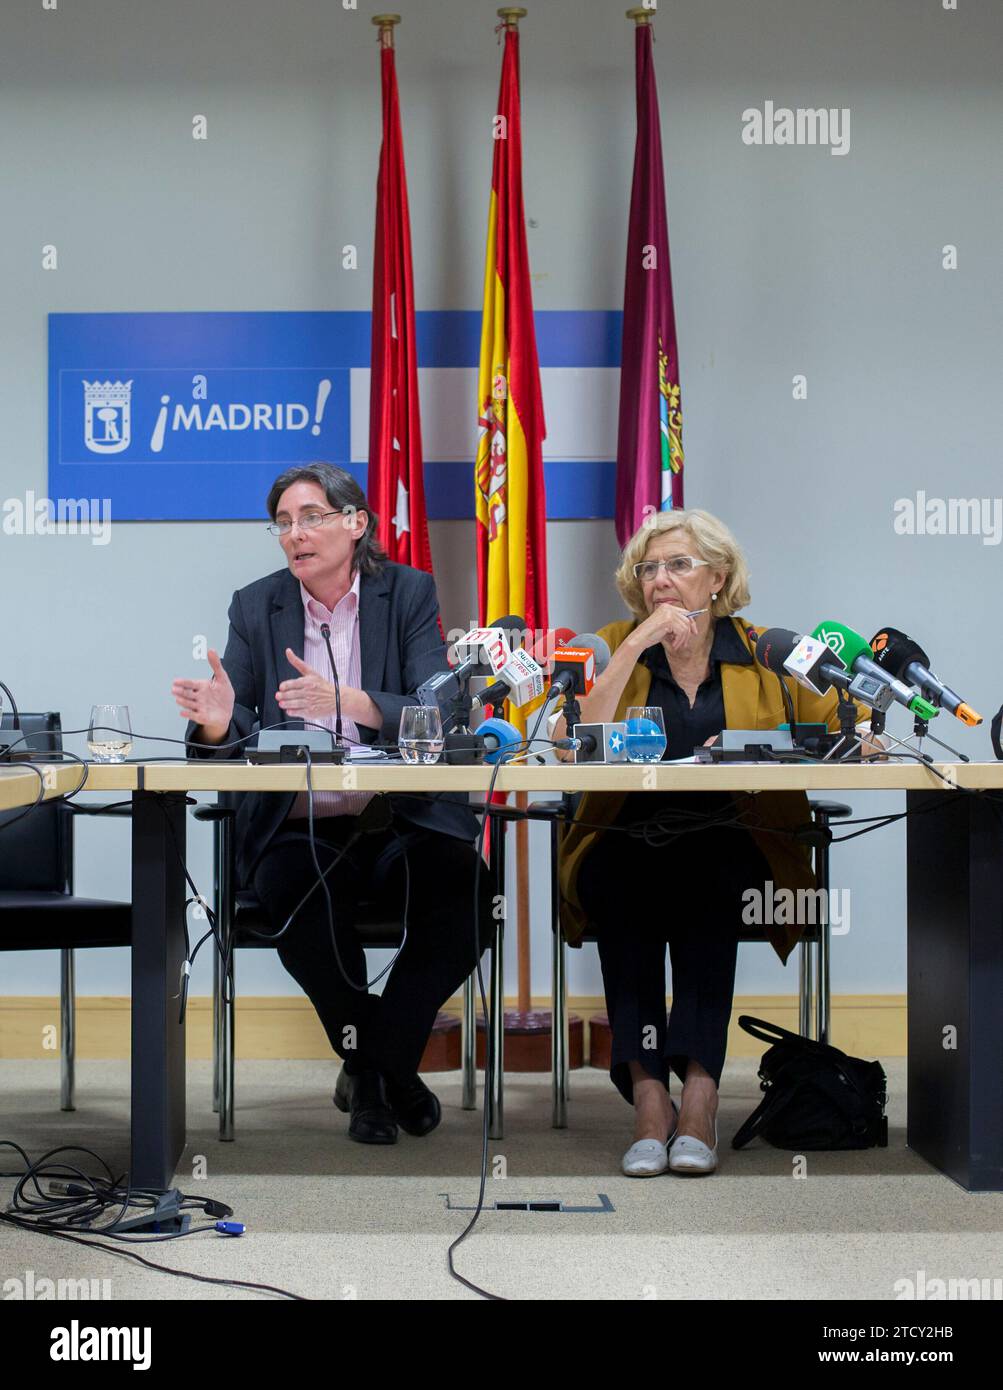 Madrid, 06/17/2015. Manuela Carmena and Marta Higueras, responsible for the social rights area, meet with the technicians of the districts of Madrid. Photo: Ignacio Gil ARCHDC. Credit: Album / Archivo ABC / Ignacio Gil Stock Photo